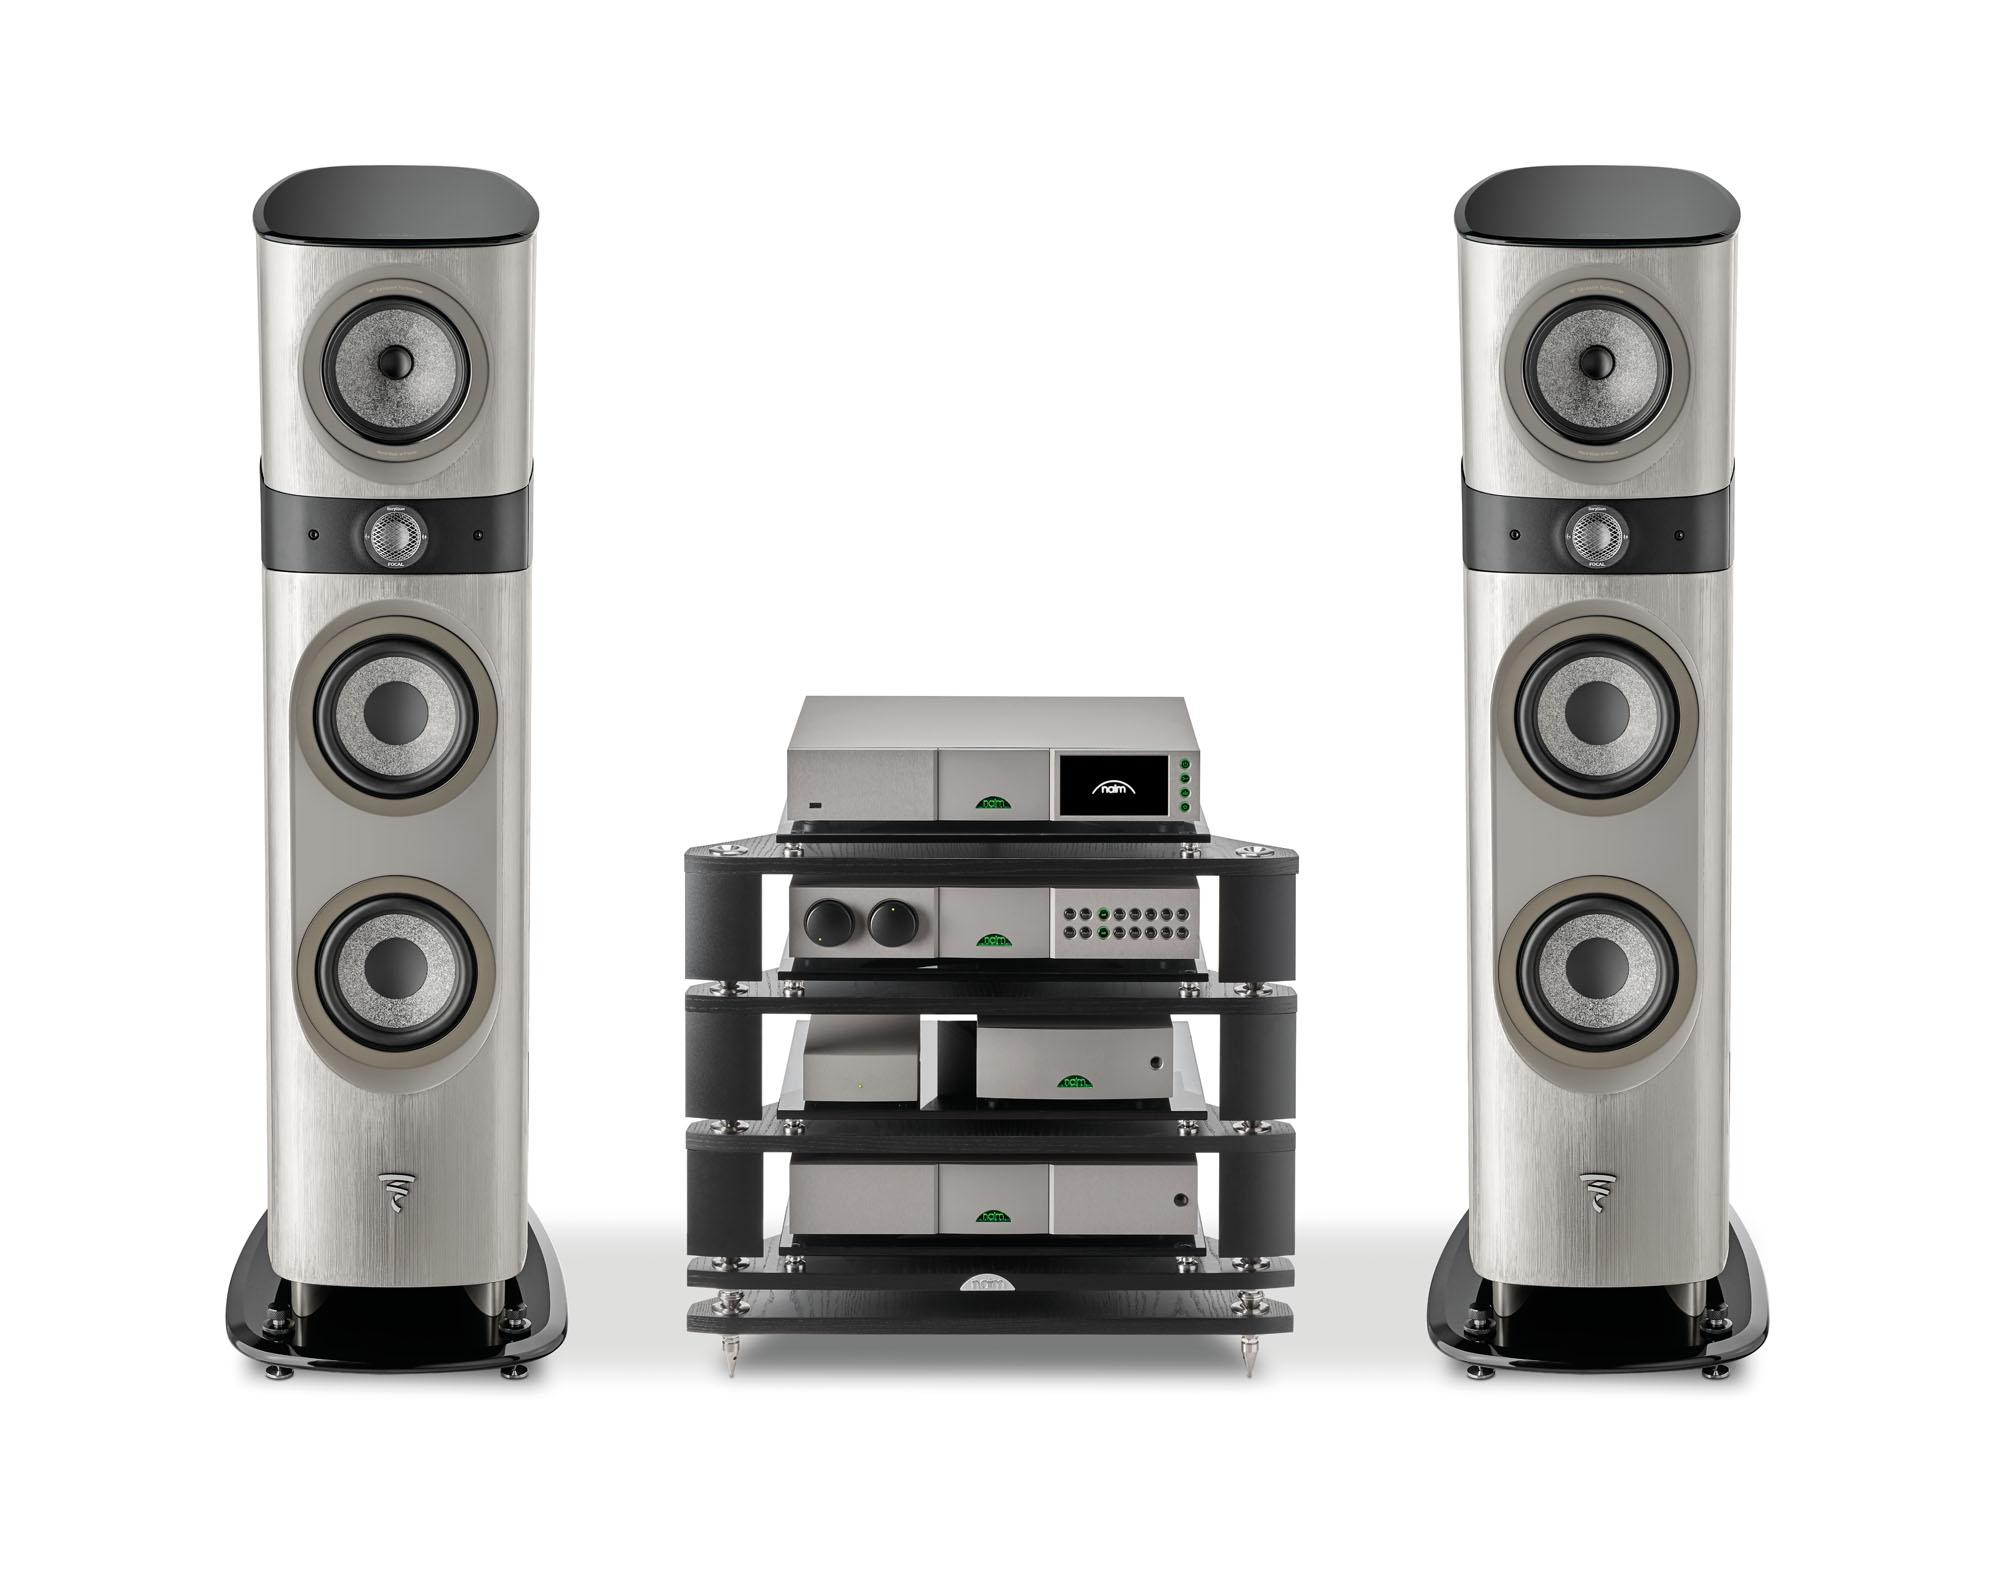 Marking ten years of Focal Naim collaboration with a system that celebrates synergy. d4a930e1 naim meuble face sopra fw